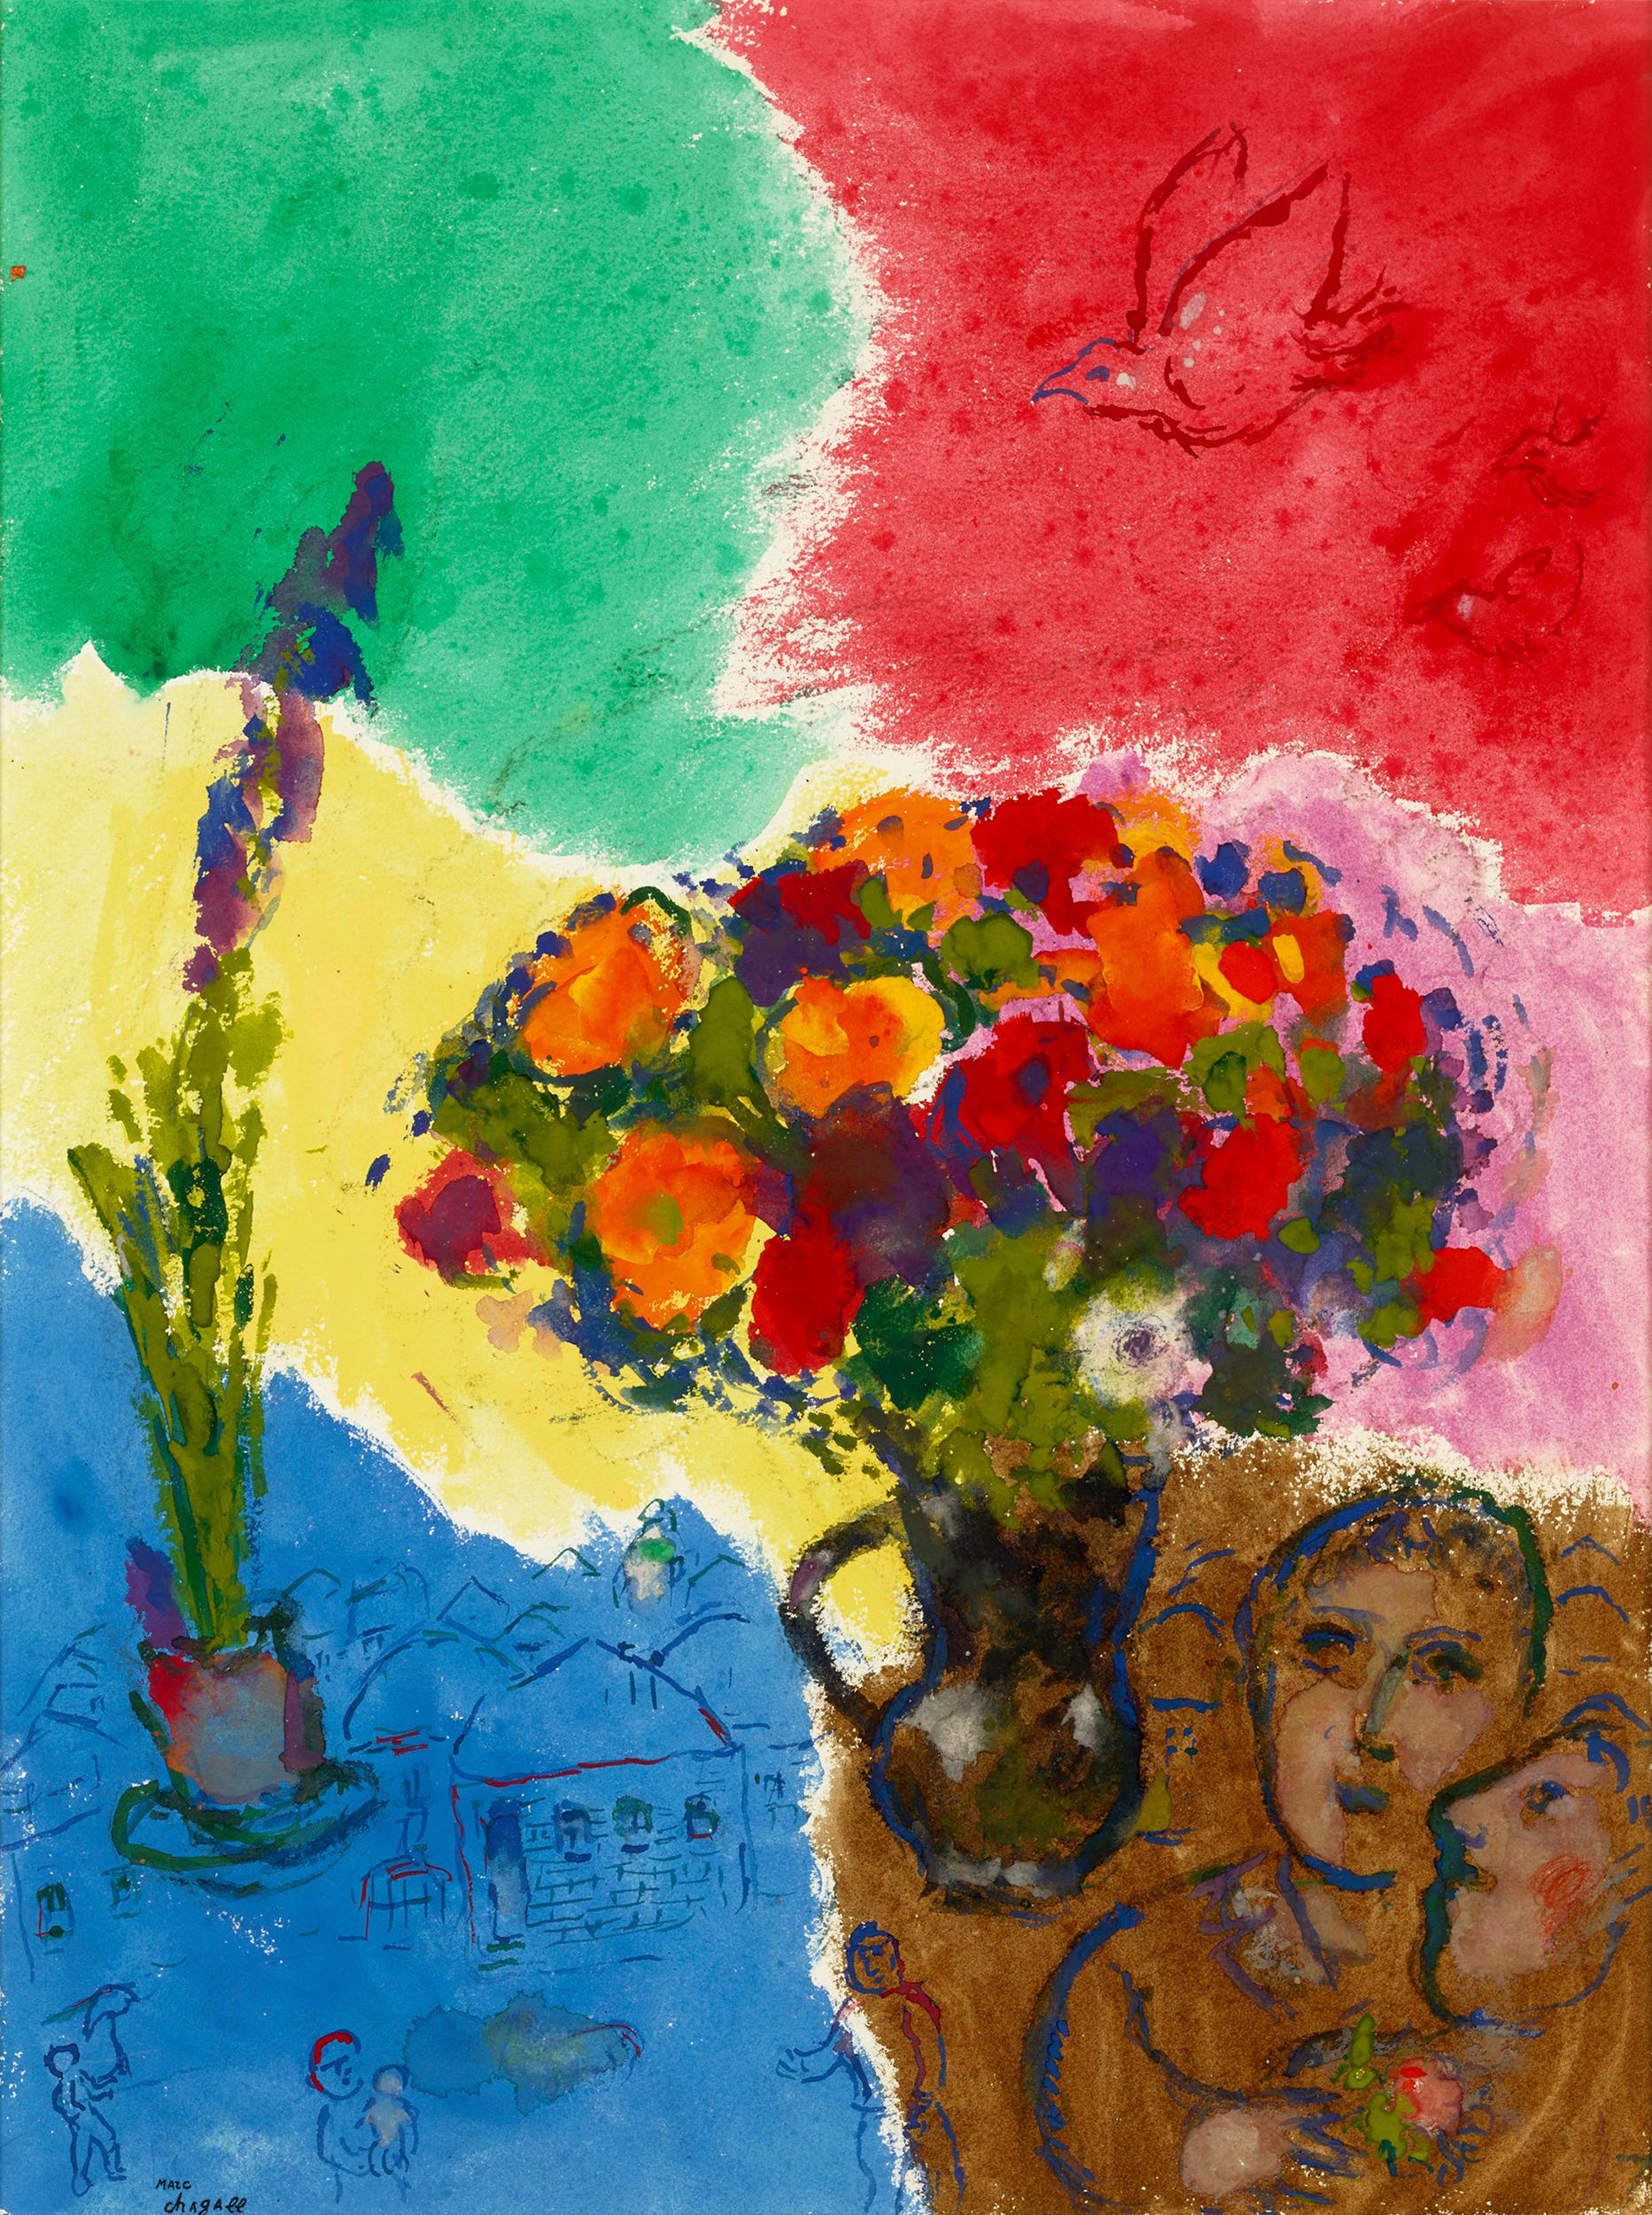 Marc Chagall
1887-1985  Russian

Les fleurs des amoureux sur fond multicolore
(Lovers’ flowers on a multicolored background)

Stamped with signature “Marc Chagall" (lower left)
Gouache, tempera and lithographic pencil on paper

“You could wonder for